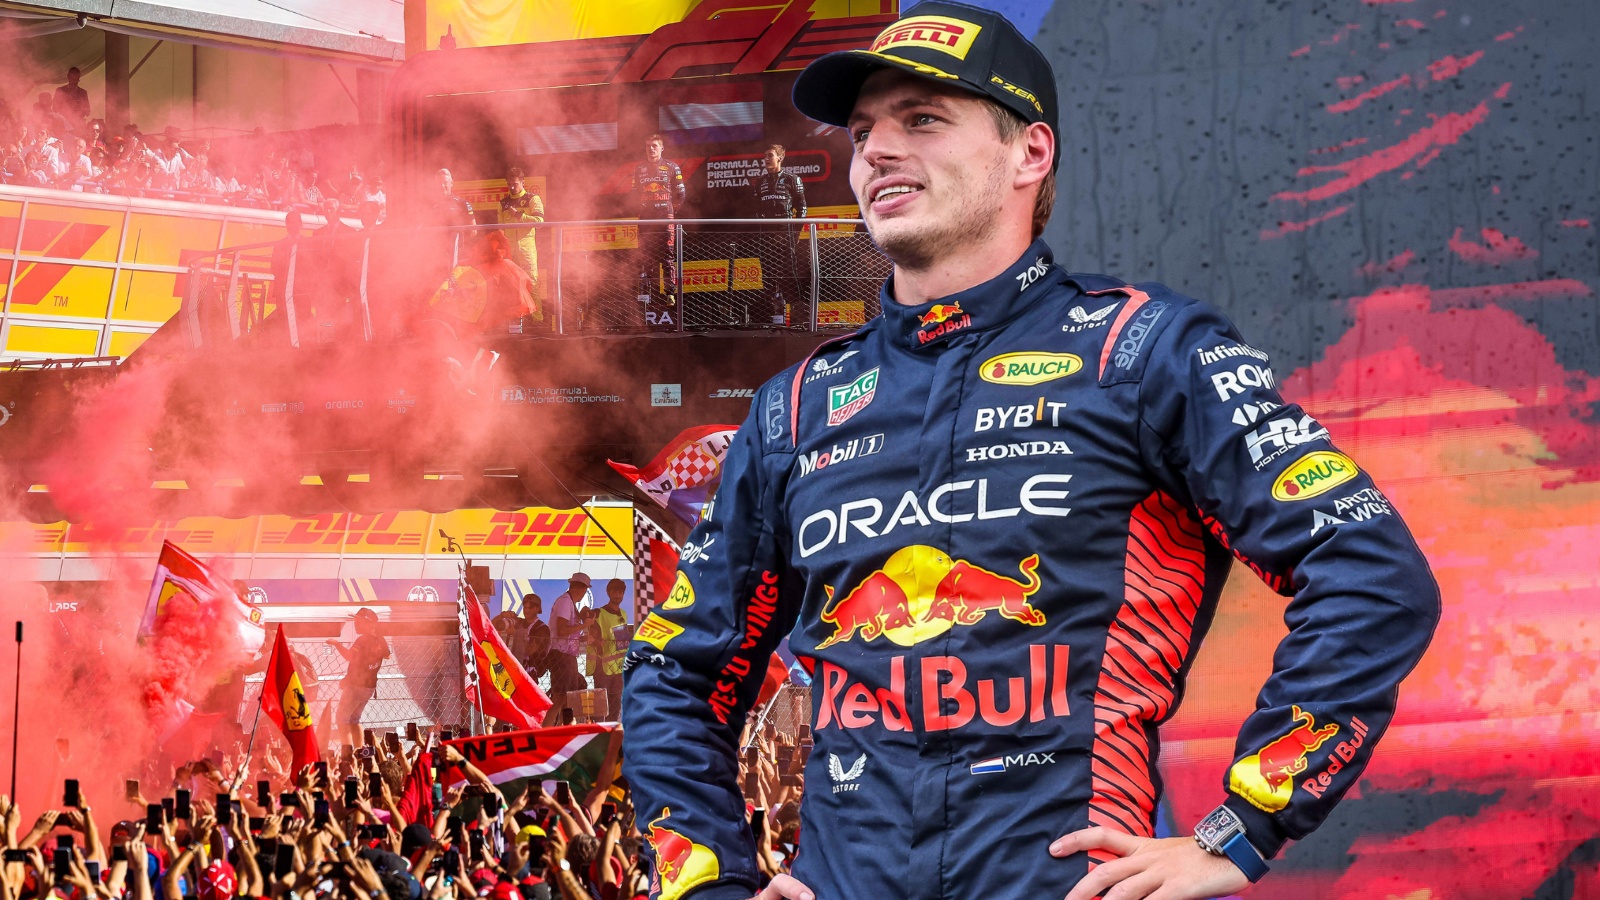 Ferrari fans expect - but Max Verstappen is ready to make history